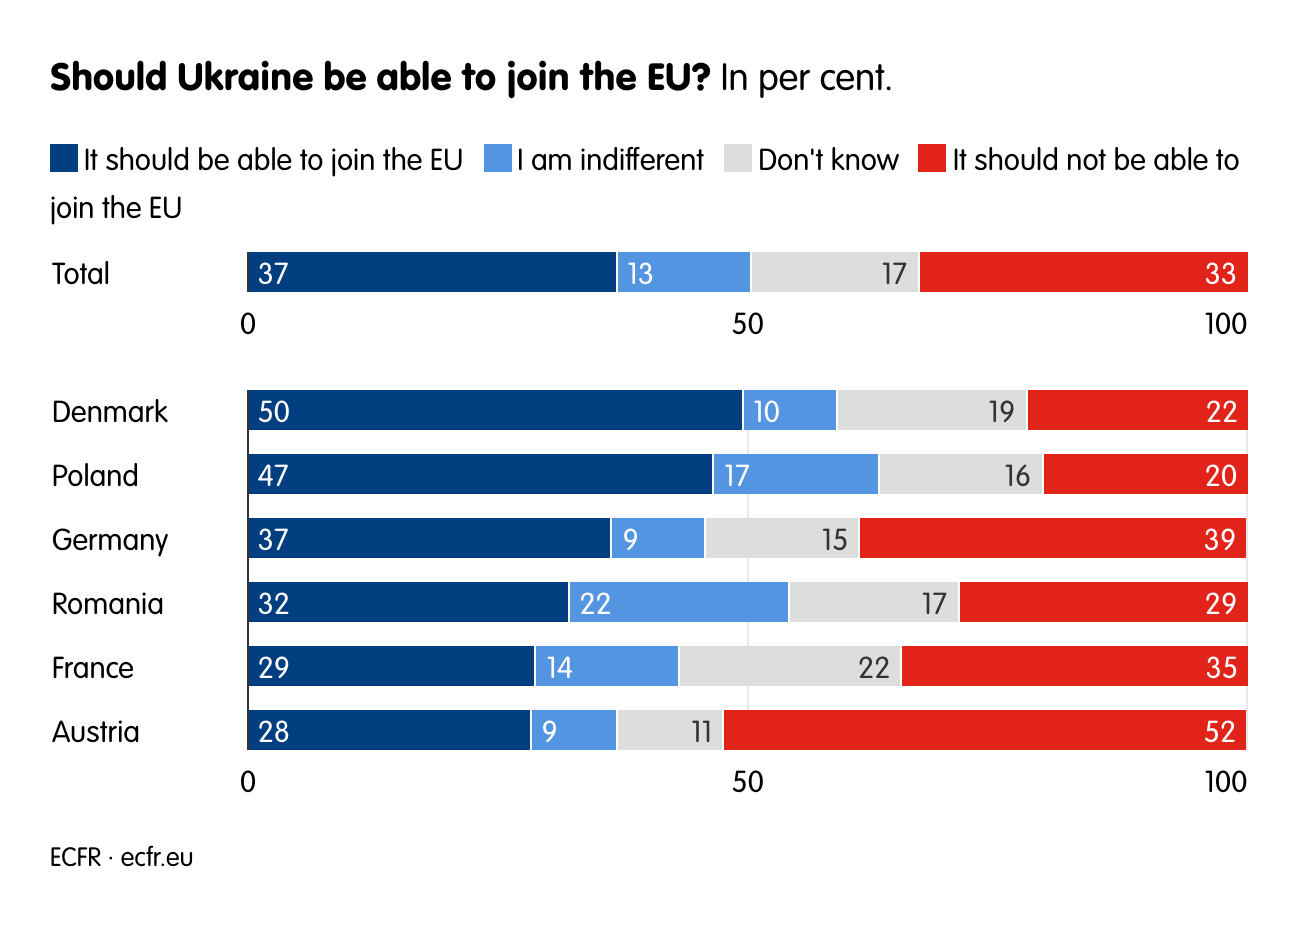 Should Ukraine be able to join the EU?